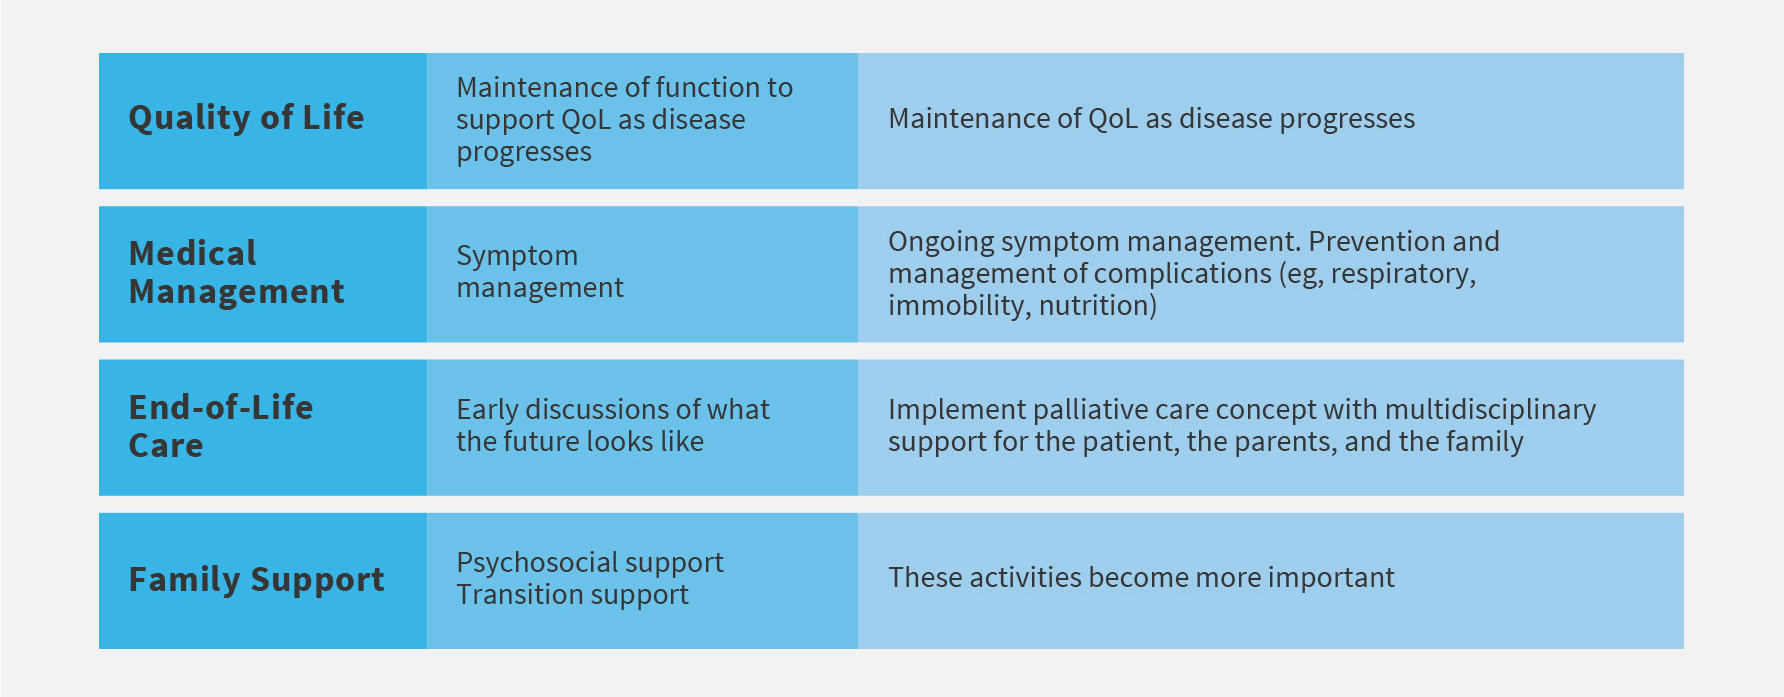 Understanding the needs of families across the spectrum of care can make an important difference in the approach to CLN2-specific management strategies.<sup>1</sup>